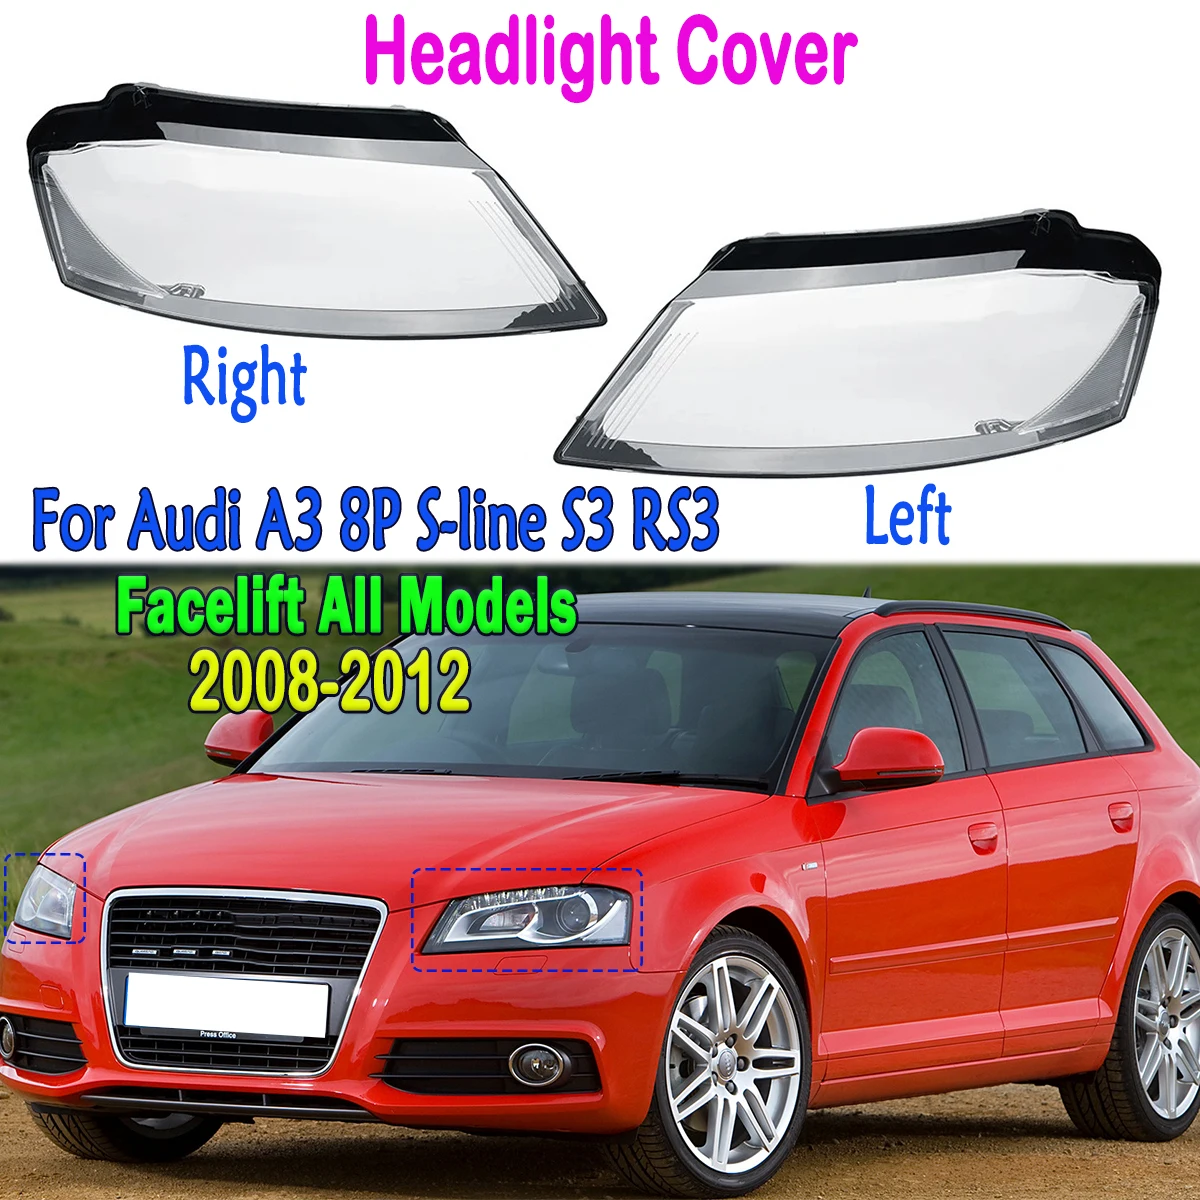 

Car Front Headlight Lens Shell Cover Left/Rigt Headlamp Caps For Audi A3 8P/S-line/S3 RS3 2008 2009 2010 2011 2012 Facelift Part